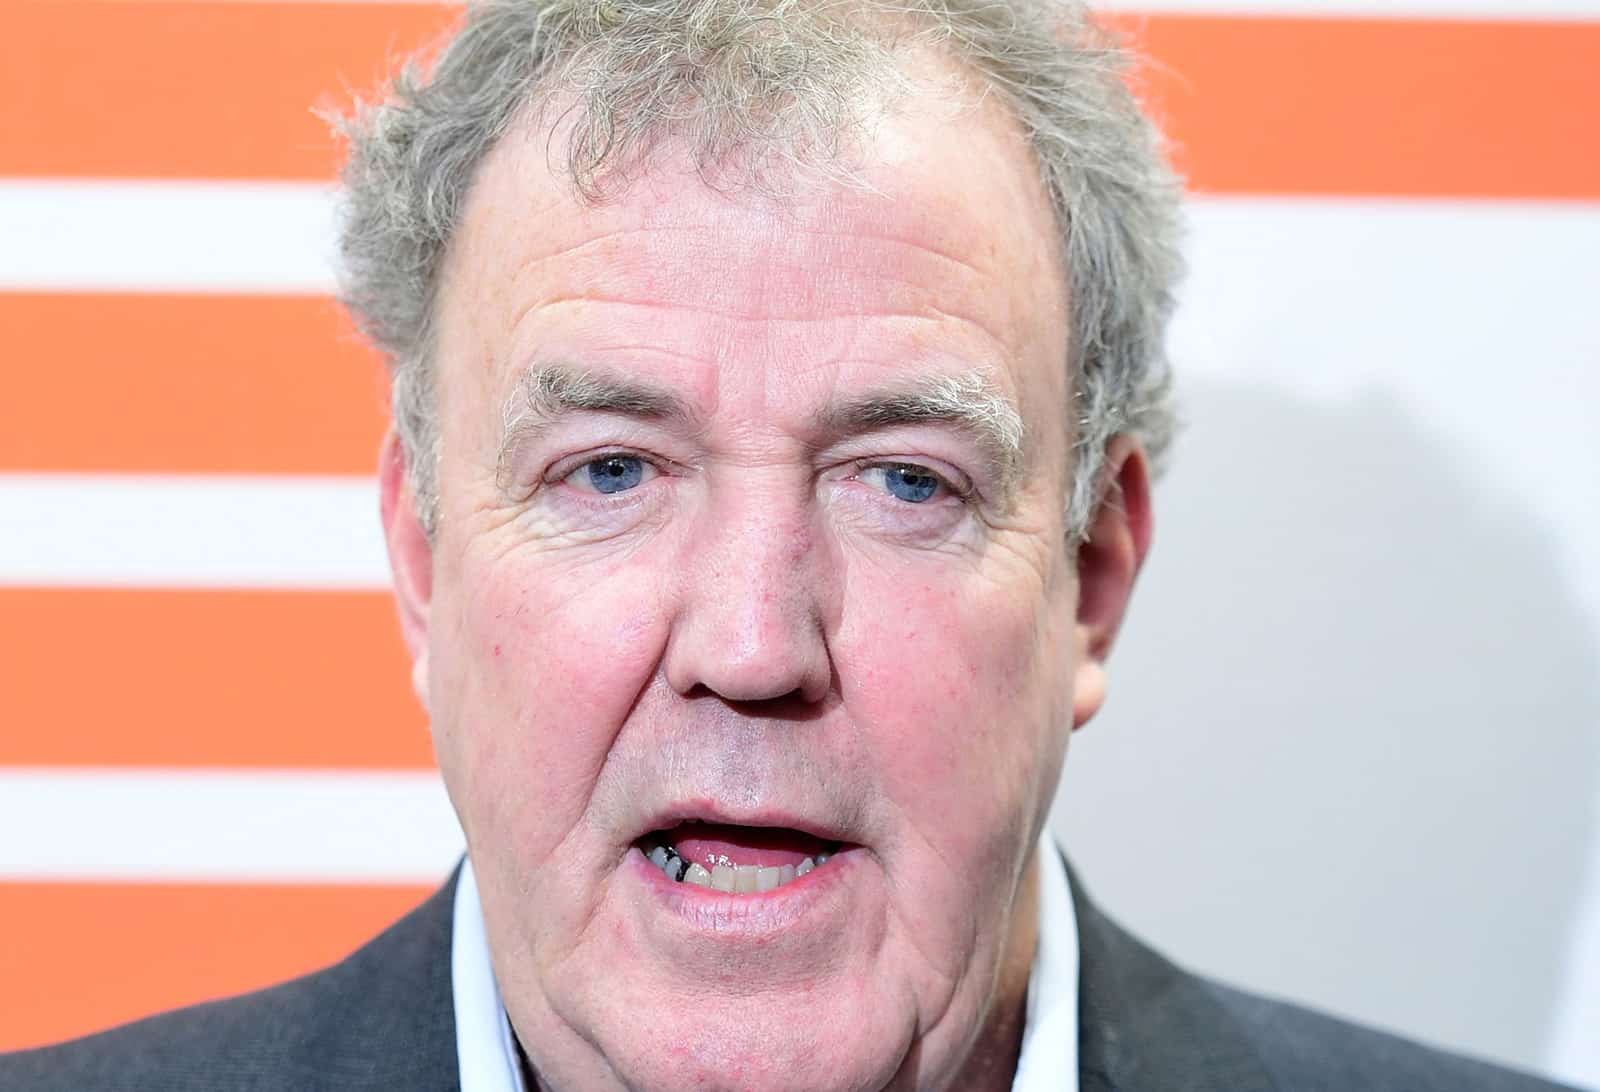 Jeremy Clarkson’s column about Meghan becomes most complained about ever